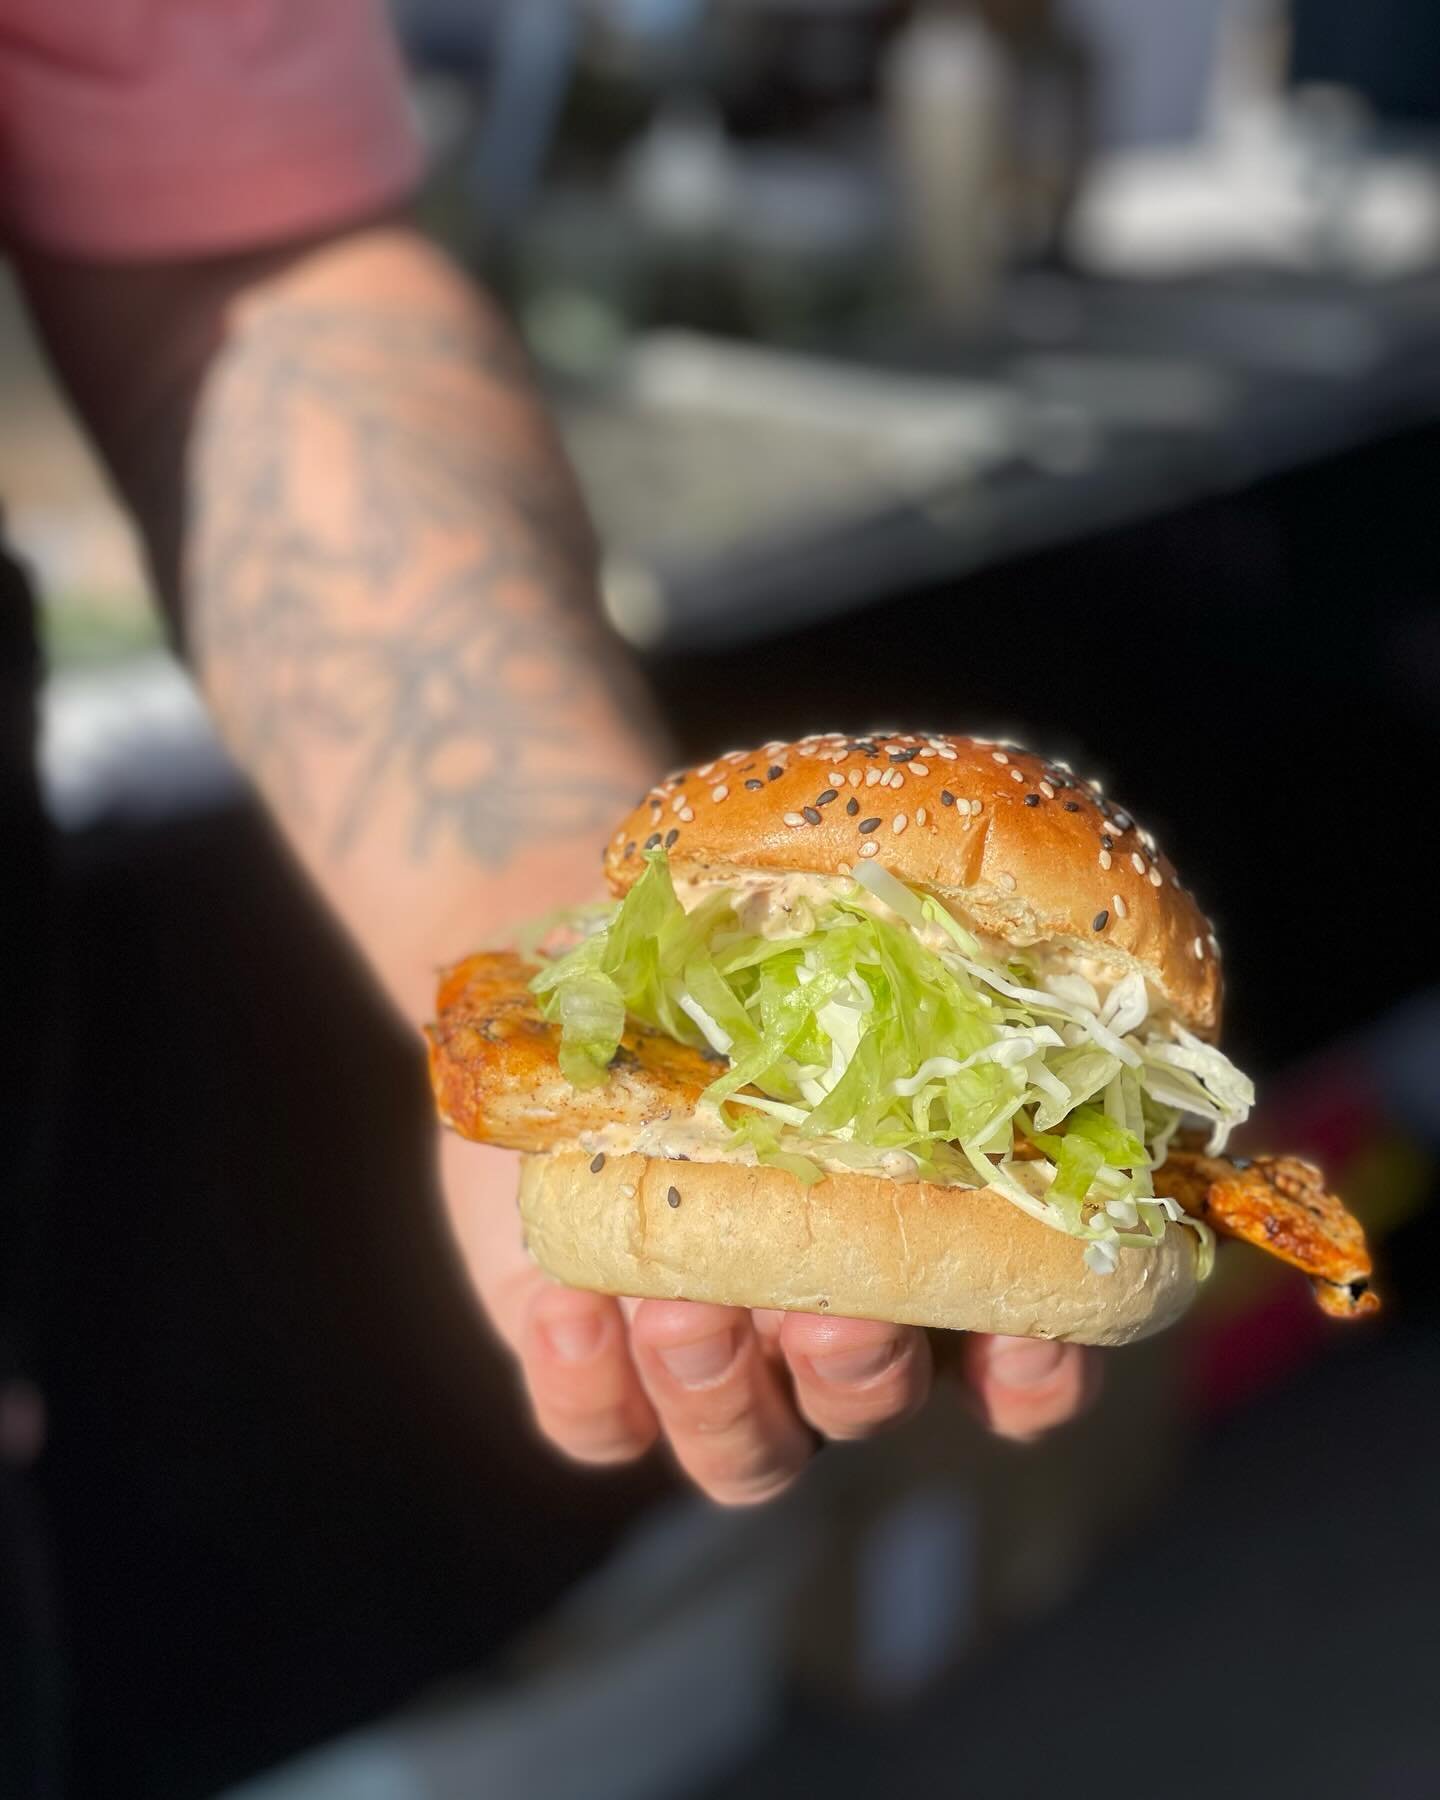 ⚡️ POP-UP TIME!⚡️Catch us at the waterfront @foambrewers tonight and grab some Viet-Cajun yums! No ticket, no rezzie, just delish food 4U. 

🍲 Pho&rsquo; Boi Sammie 🍲
Overnight Pho-Braised Beef, Nuoc Cham Mayo, Herb Salad, Marinated Cuke, Crispy No